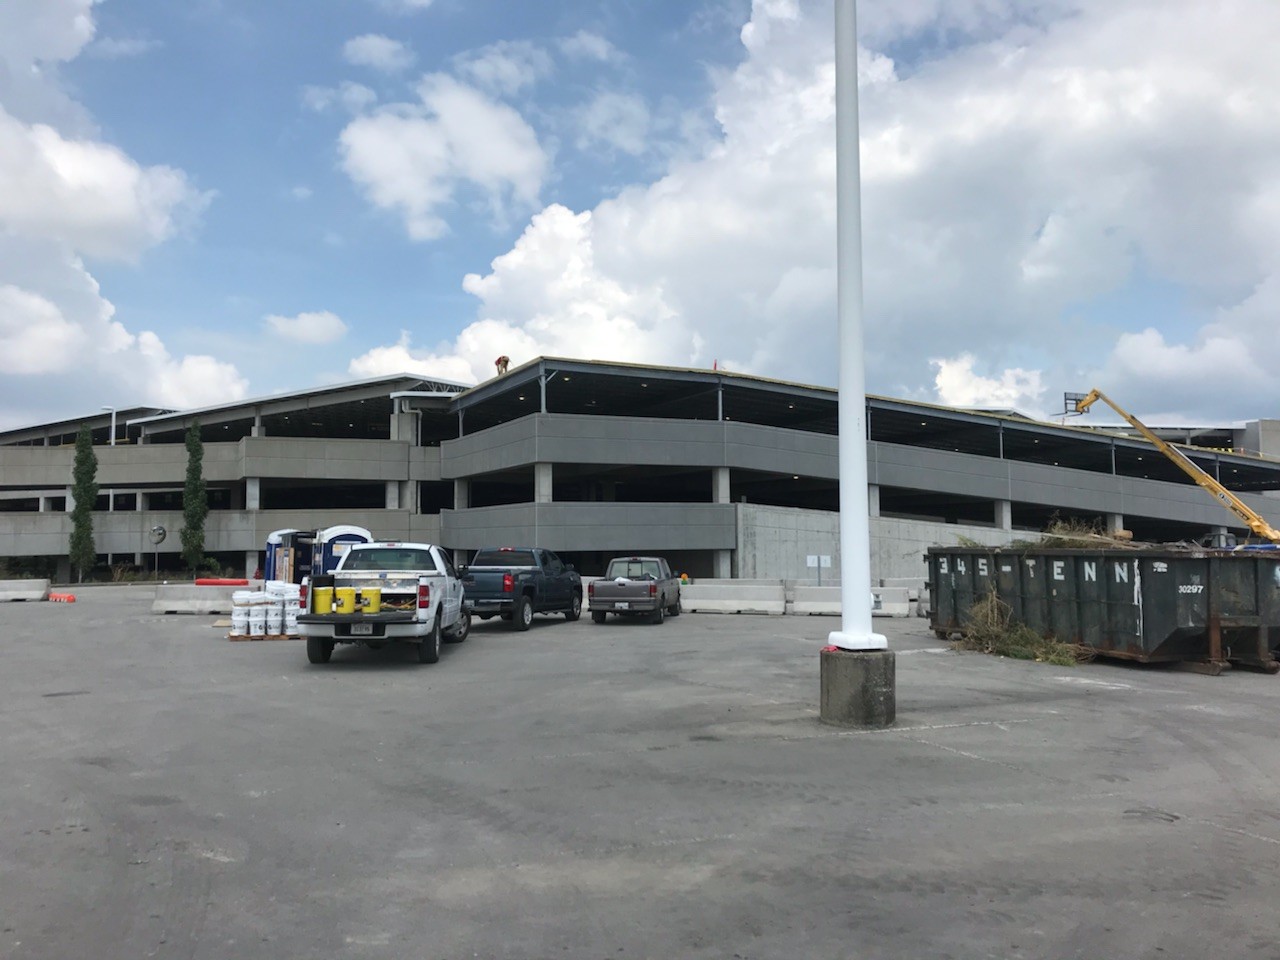 commercial roofing project completed Nashville int'l airport BNA